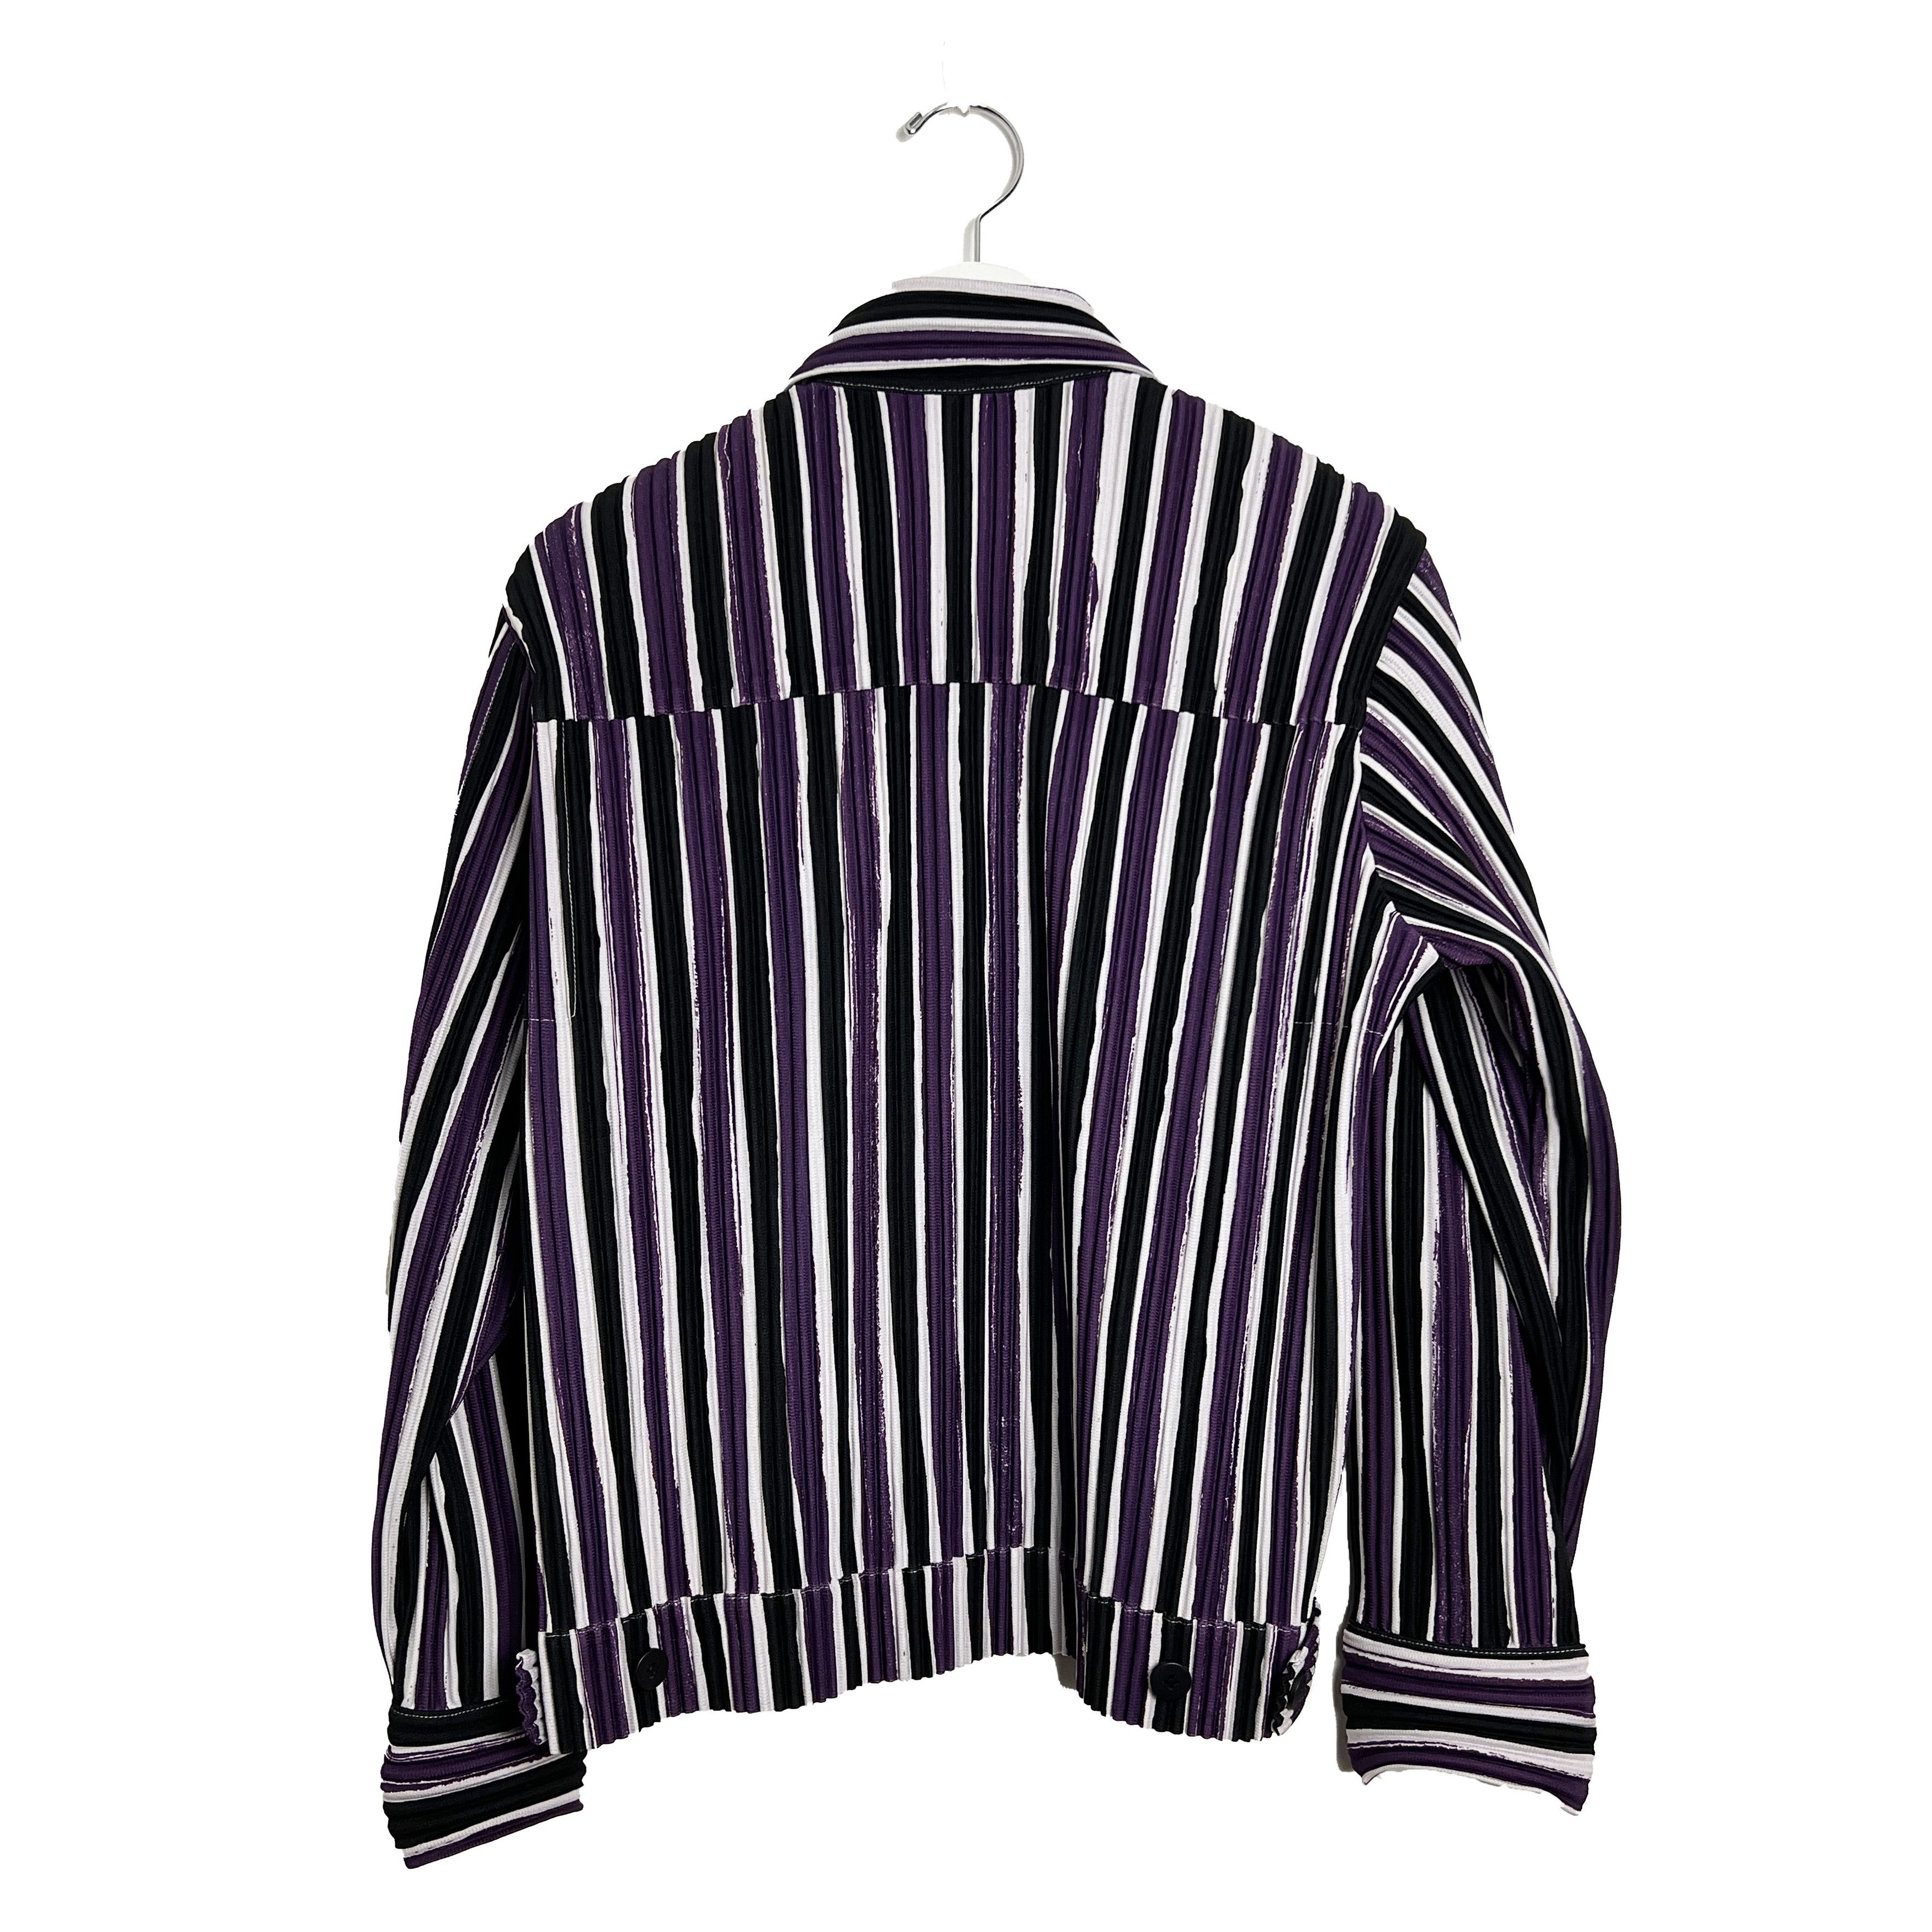 Issey Miyake Homme Plisse Striped Trucker Jacket Size US S / EU 44-46 / 1 - 2 Preview